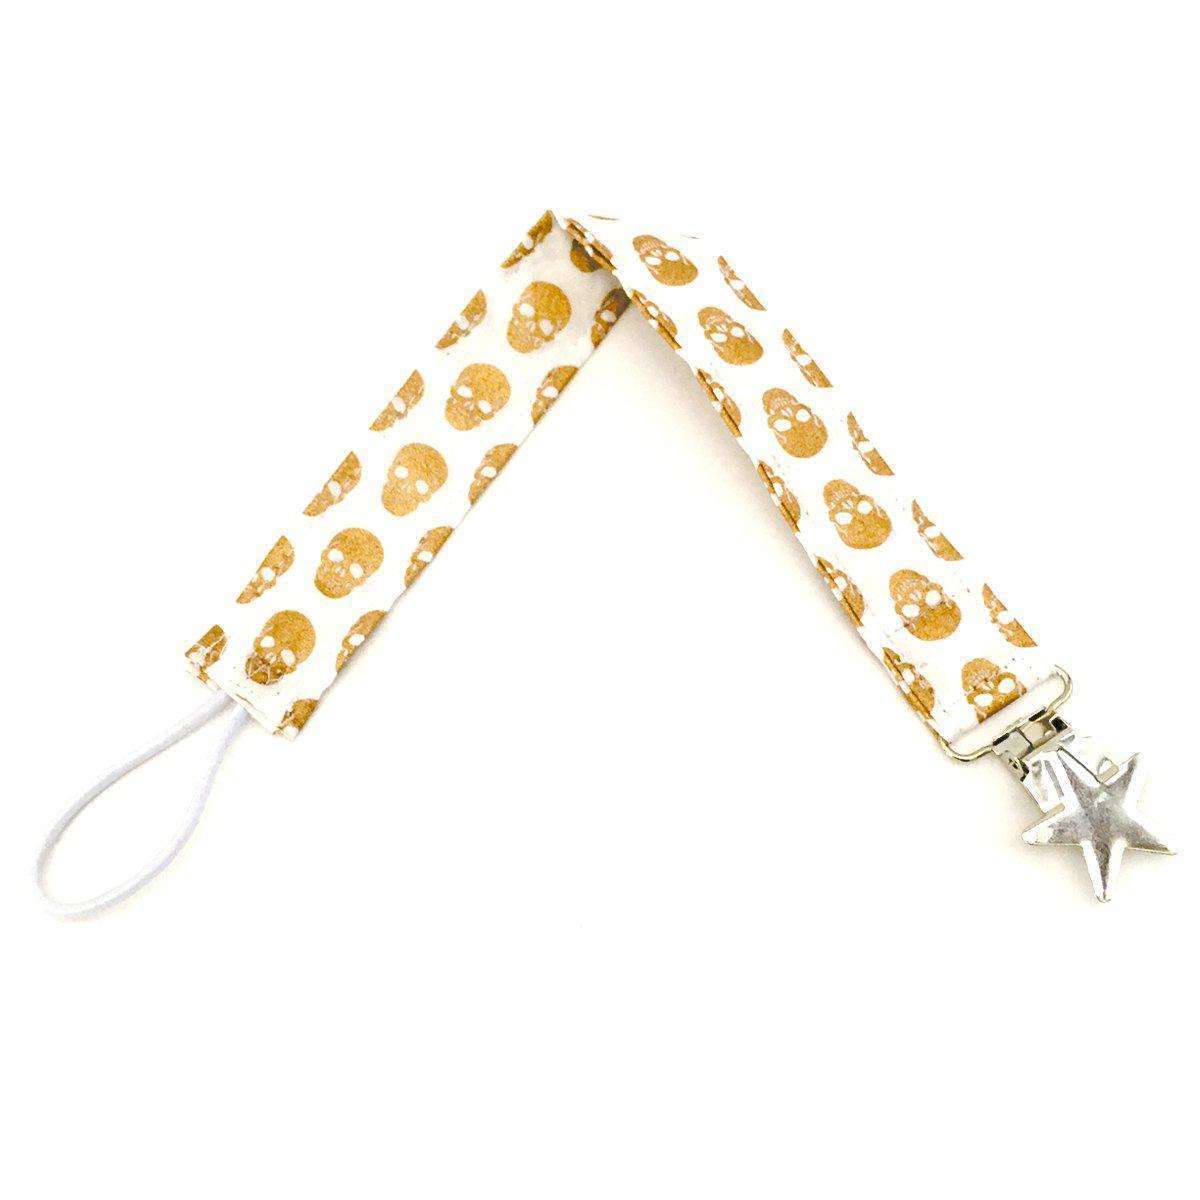 Baby teether dummy clips in gold skull pattern alt